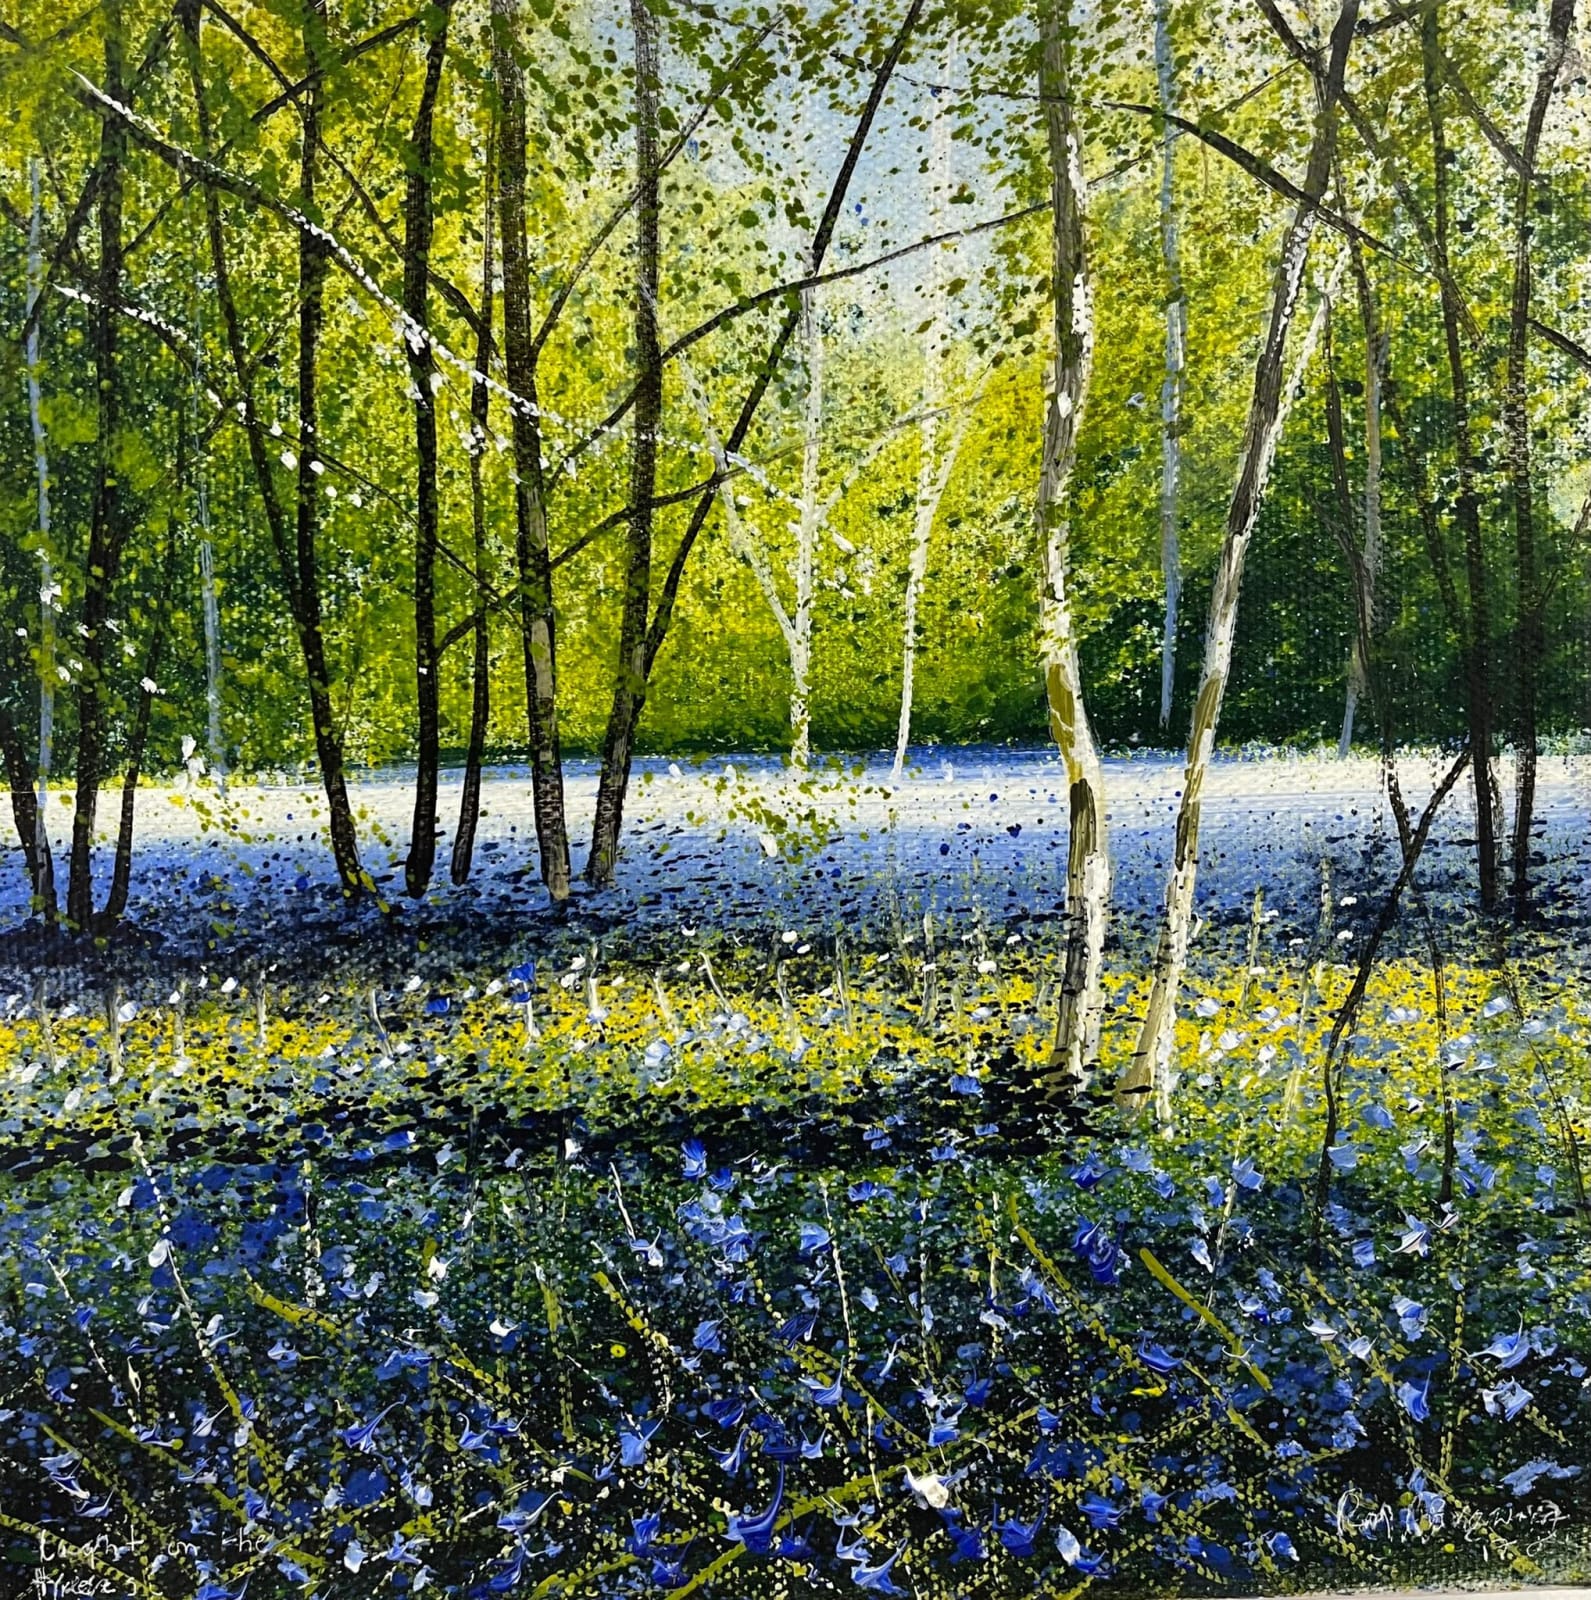 Rory Browne, 'Light on the Trees, Bluebells', 2021